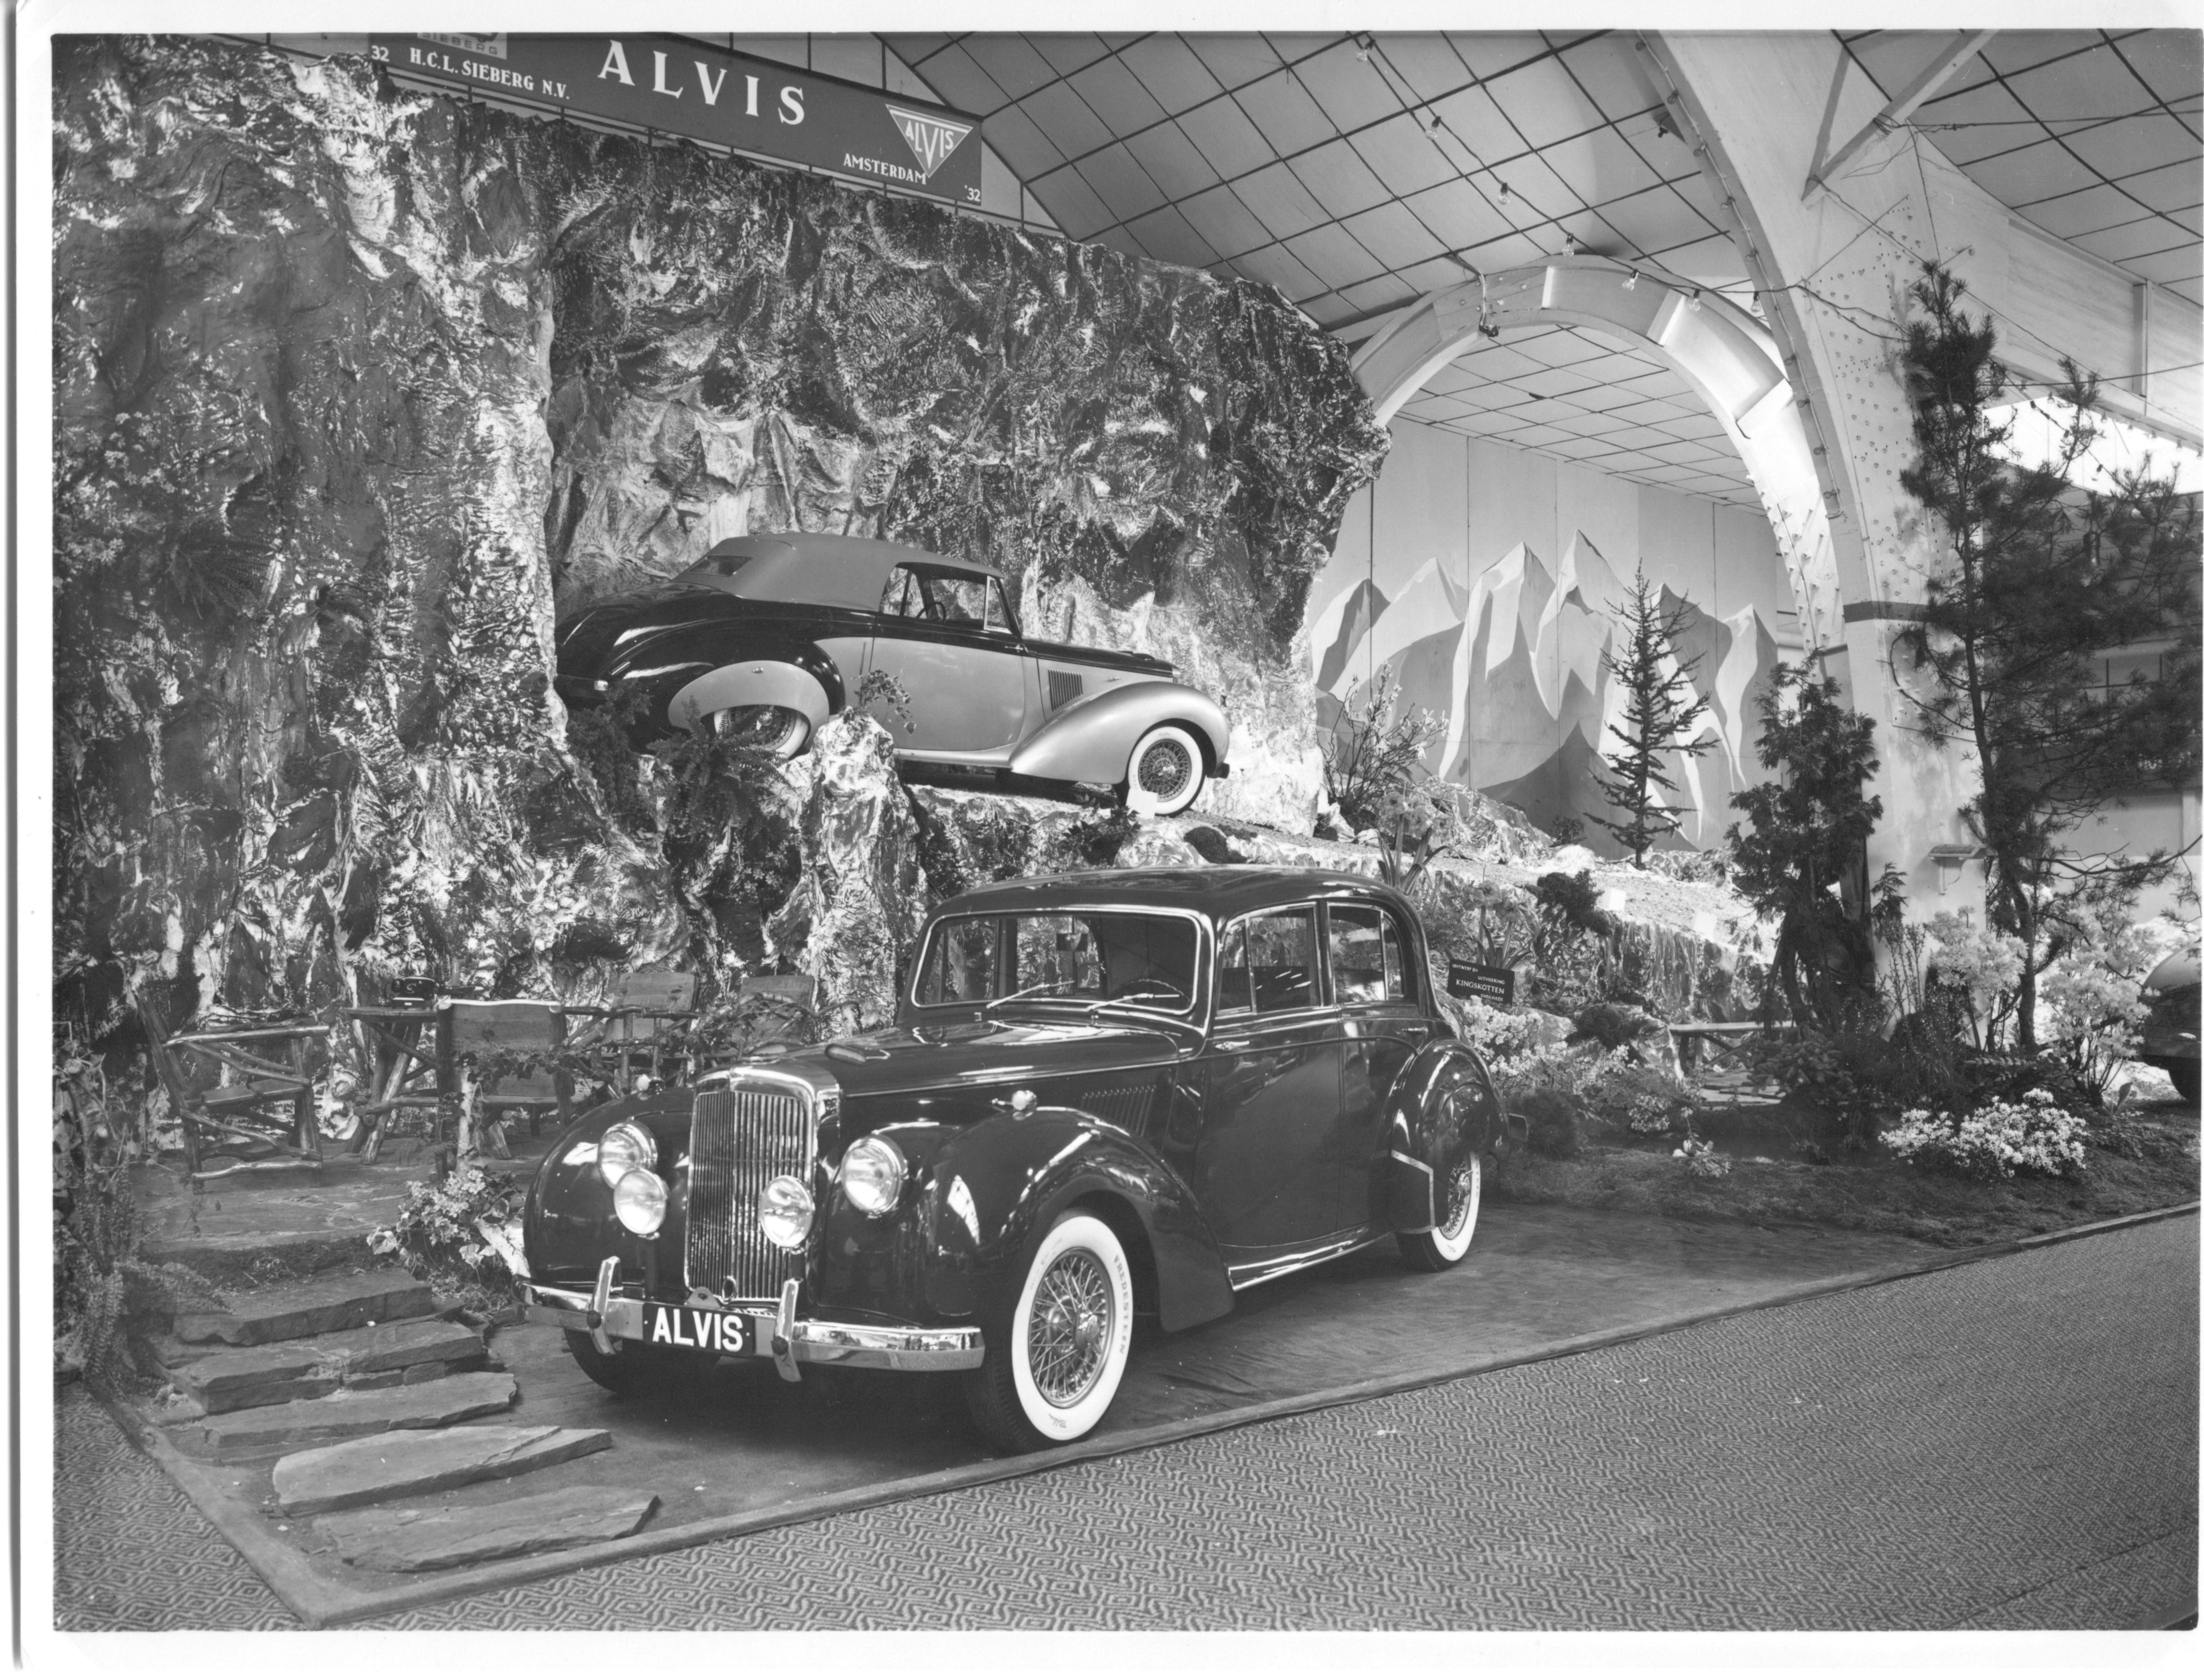 alvisarchive | Alvis engineering history, from T G John in the ...